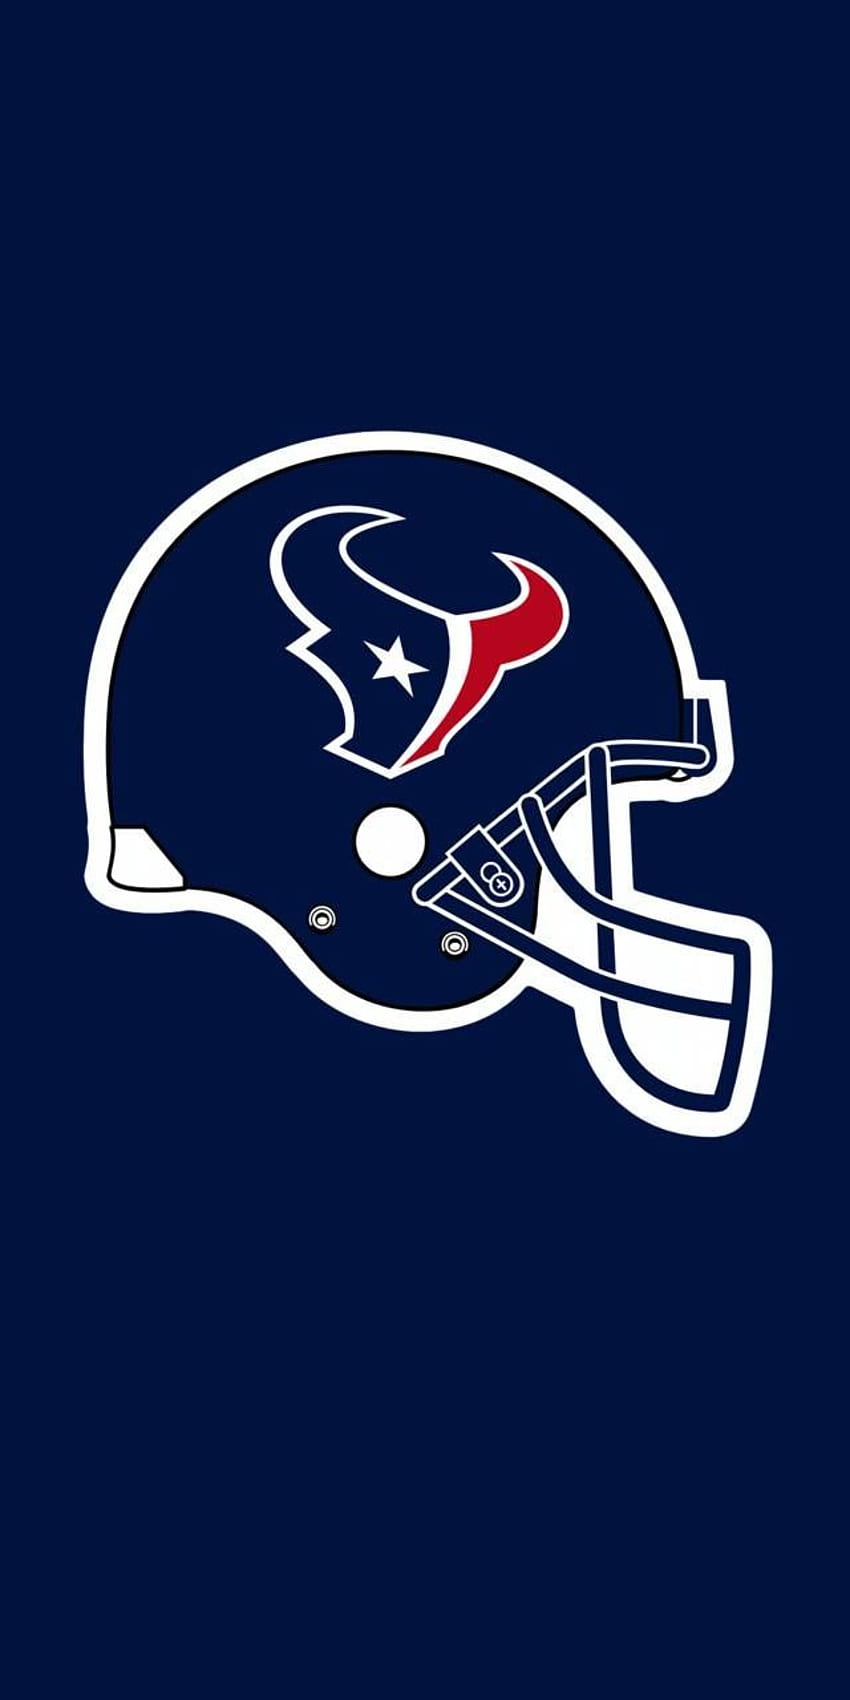 Page 5, houston texans for HD wallpapers